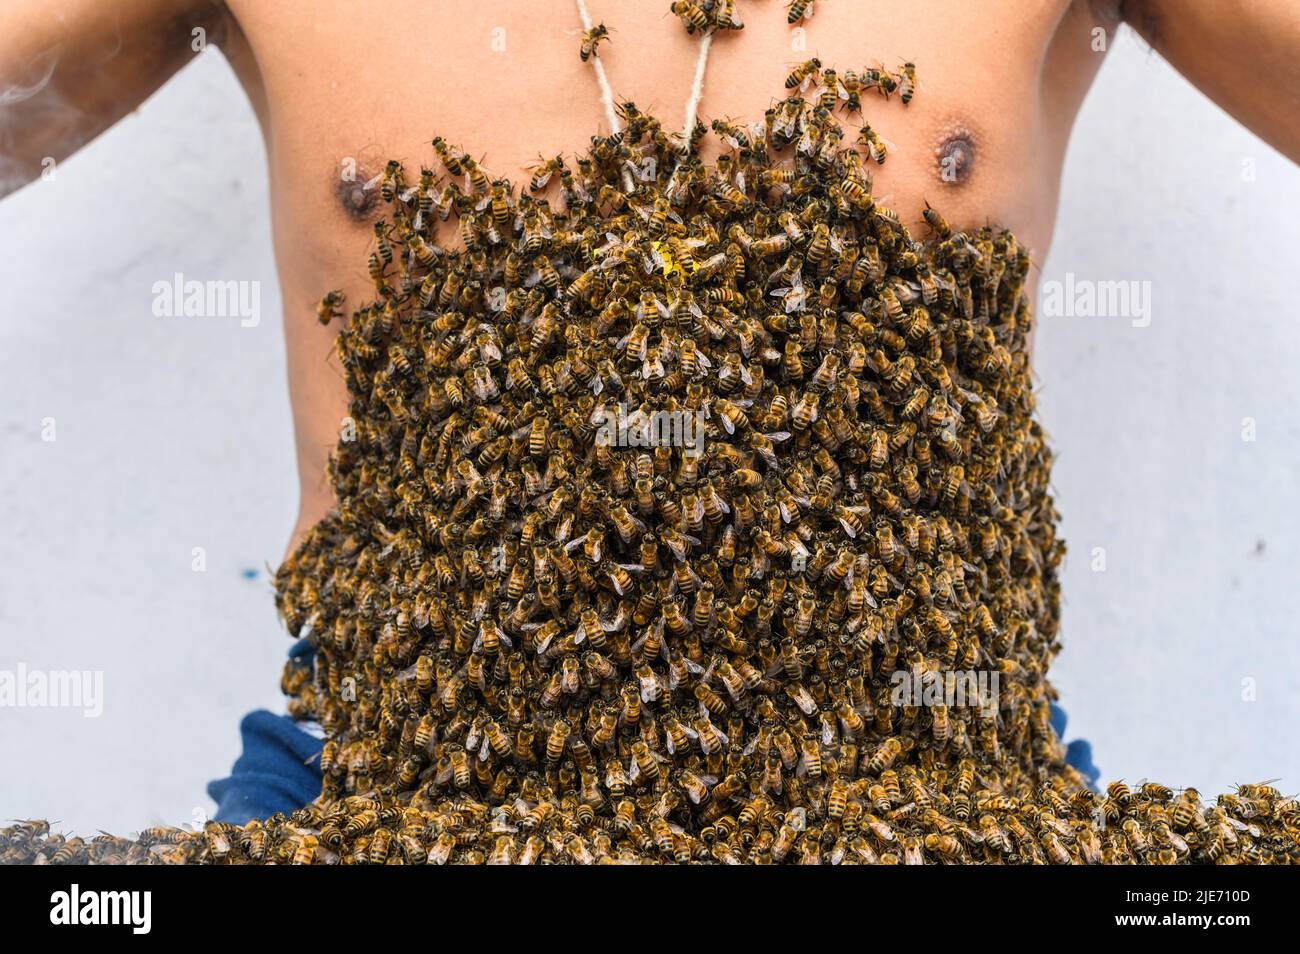 A beekeeper covered in bees, bee treatment Stock Photo